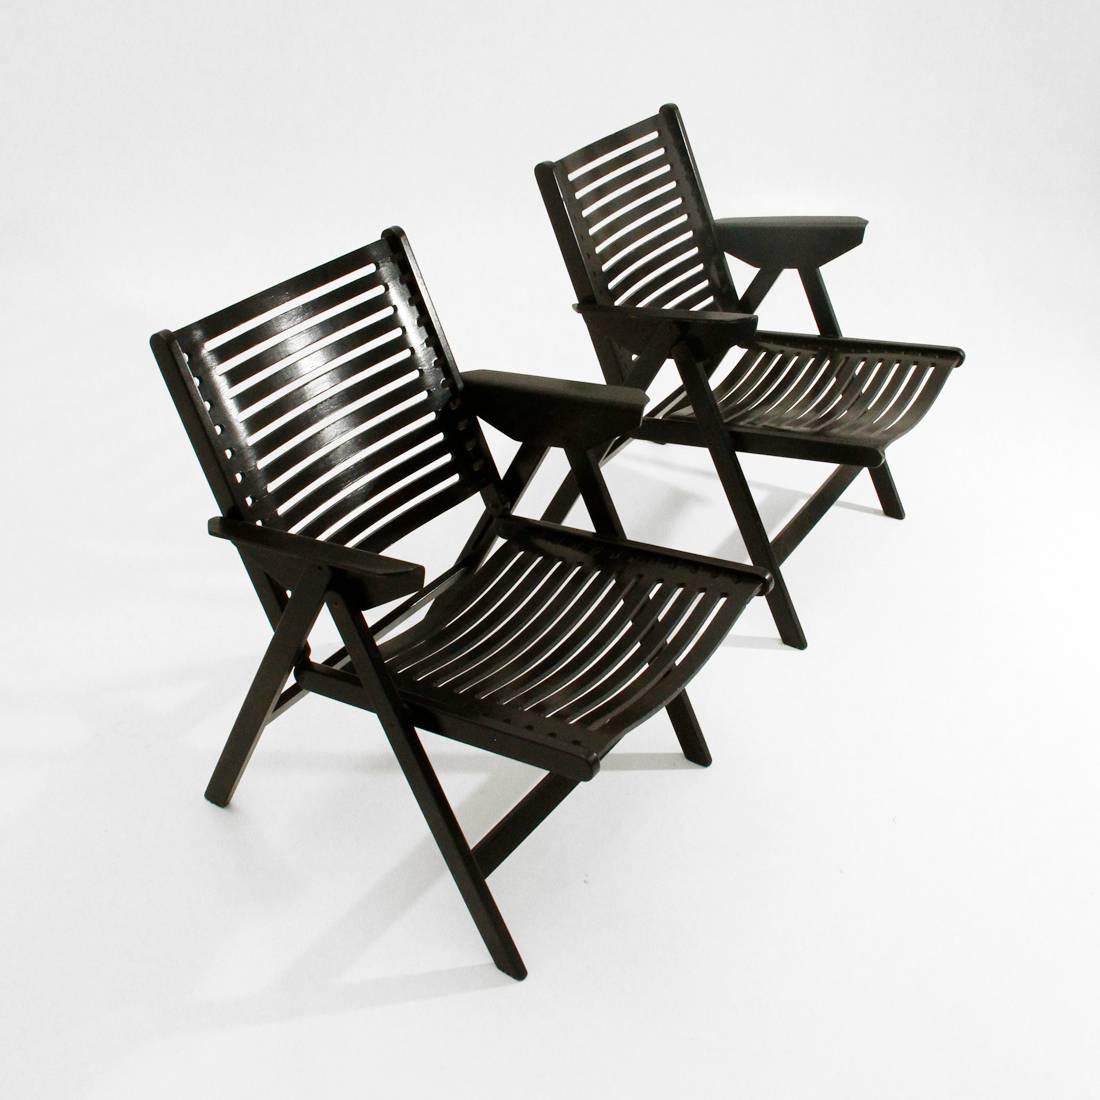 Pair of folding chairs produced in Slovenia in the 1950s by Stol, designed by Niko Kralj.
frame in hot-bent Plywood and solid wood, black varnished.
Good general conditions, some paint shortages.

Dimensions: Width 57 cm, depth 64 cm, height 73